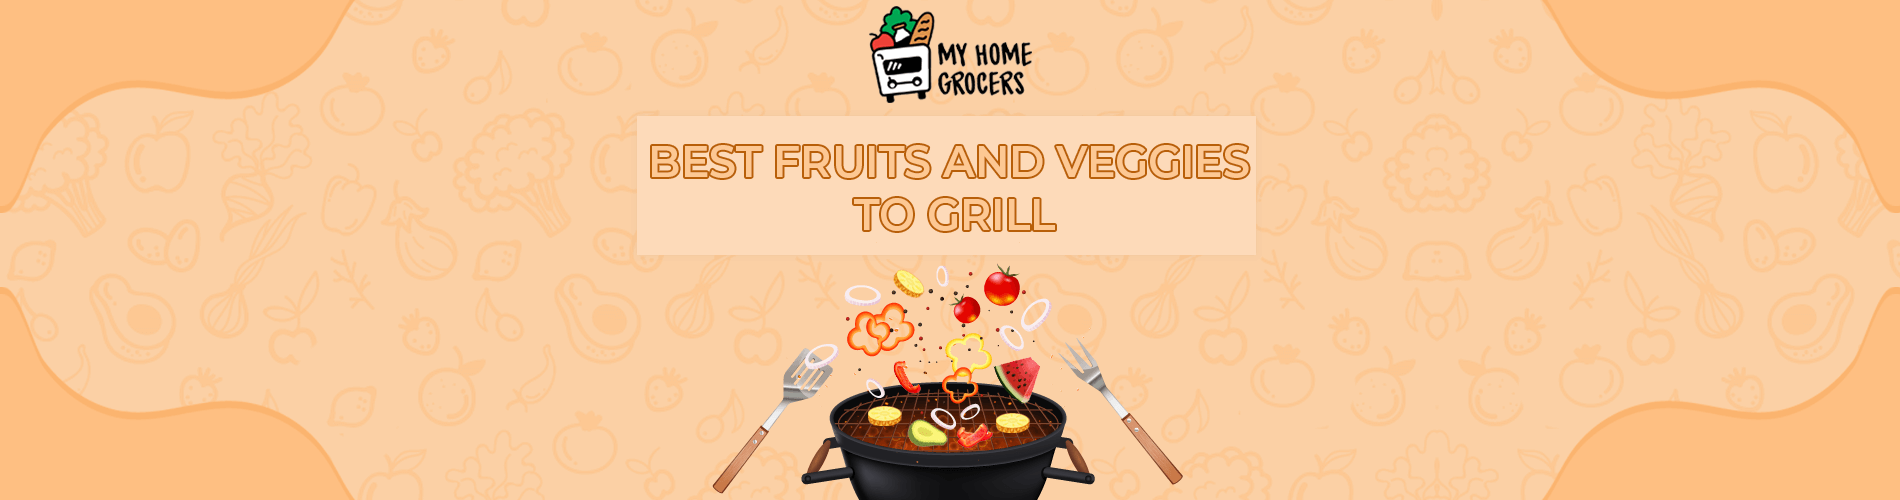 Best Fruits and Veggies to Grill for a Tasty Twist